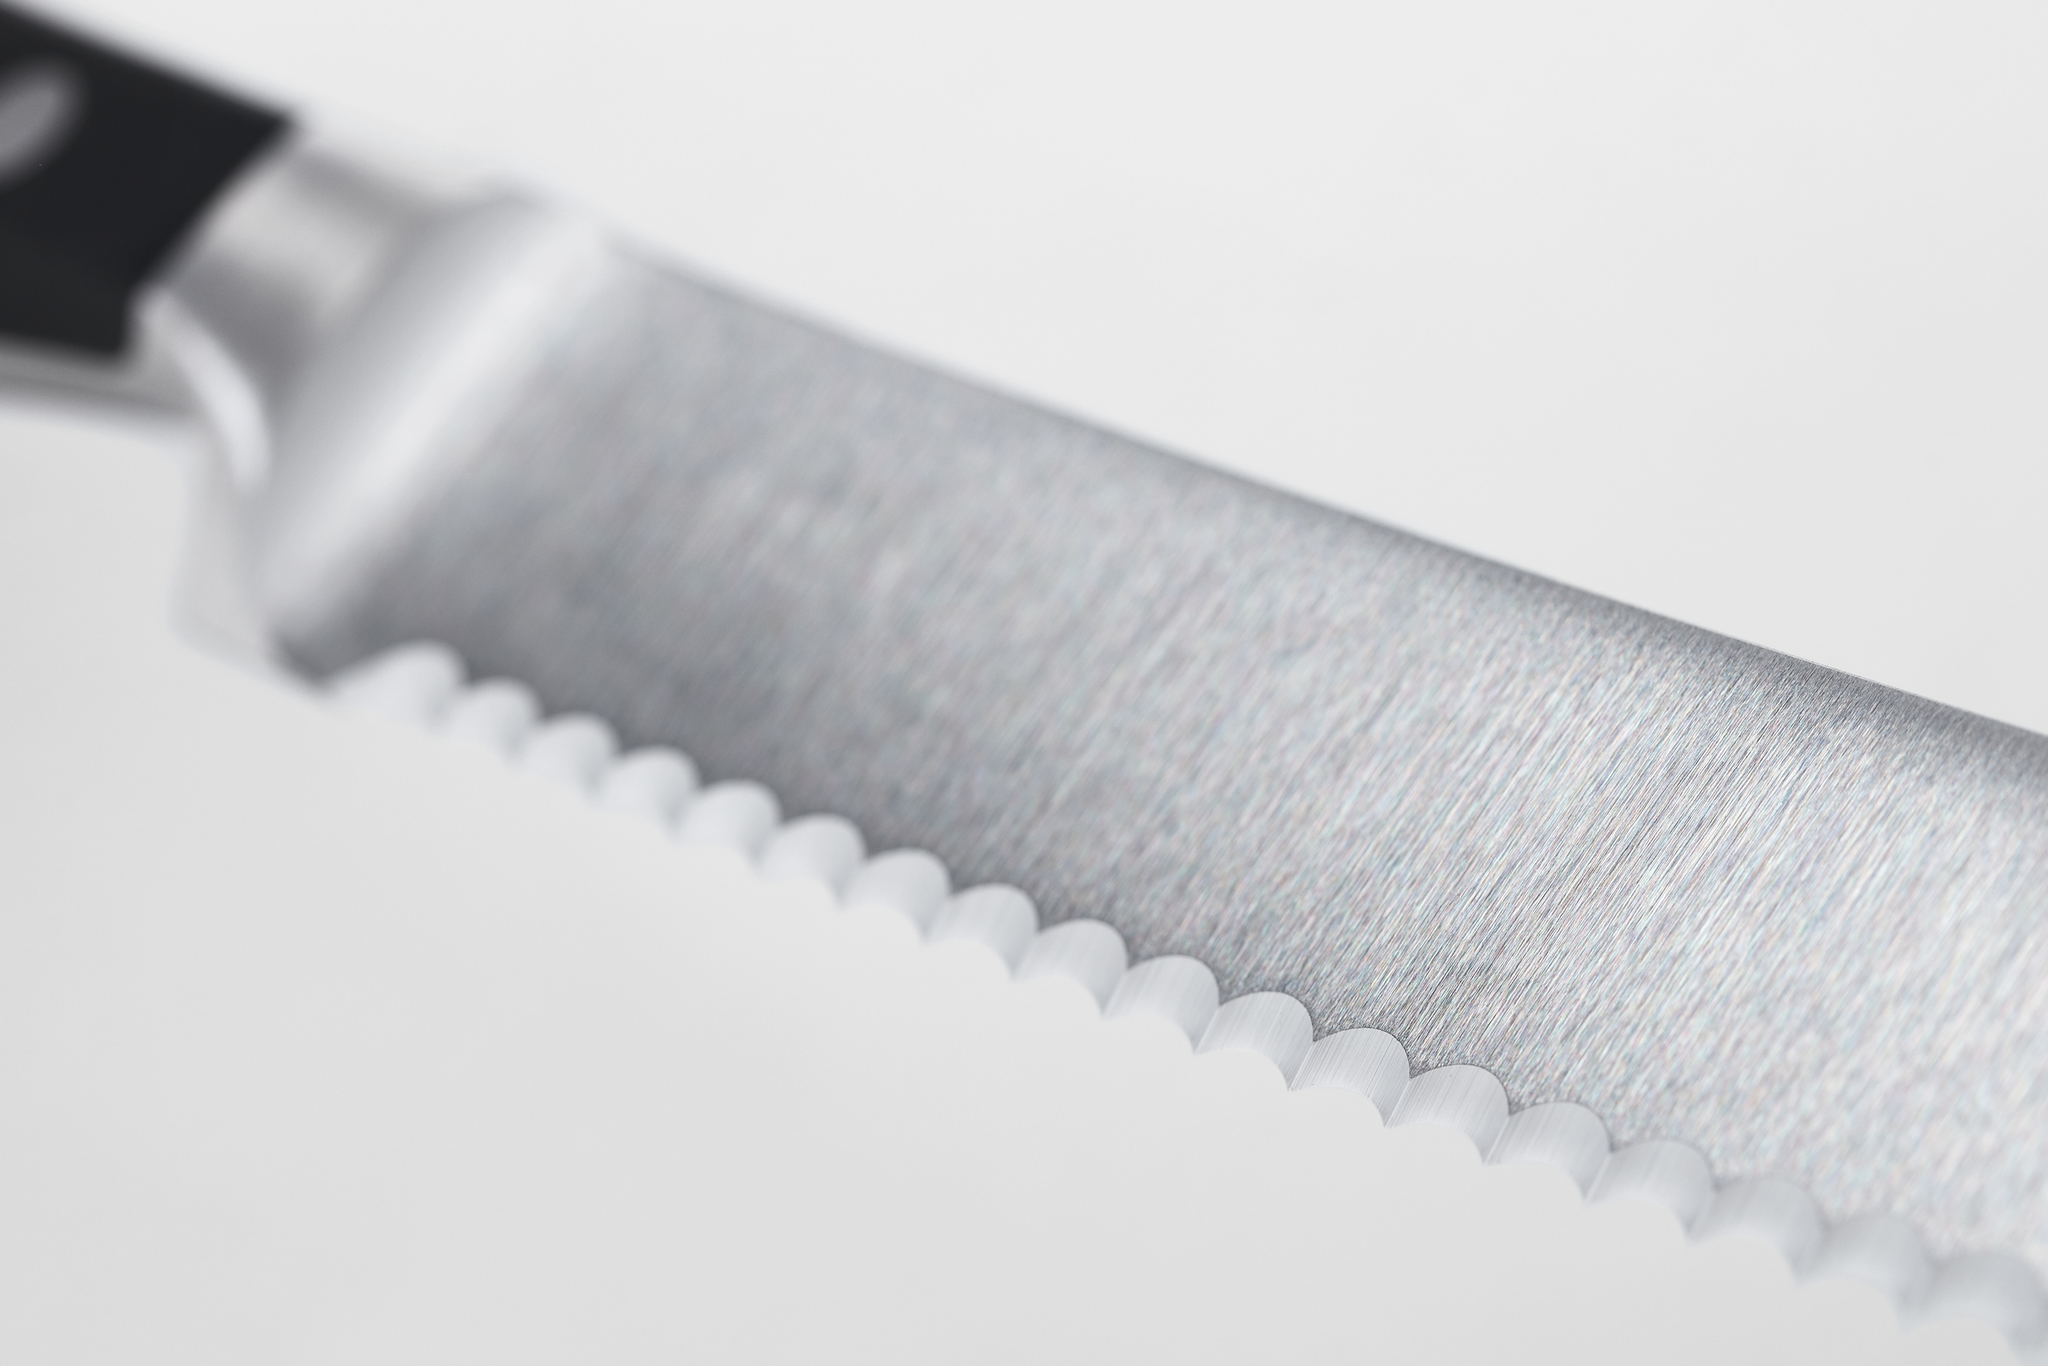 Classic 3 1/2" Fully-Serrated Paring Knife